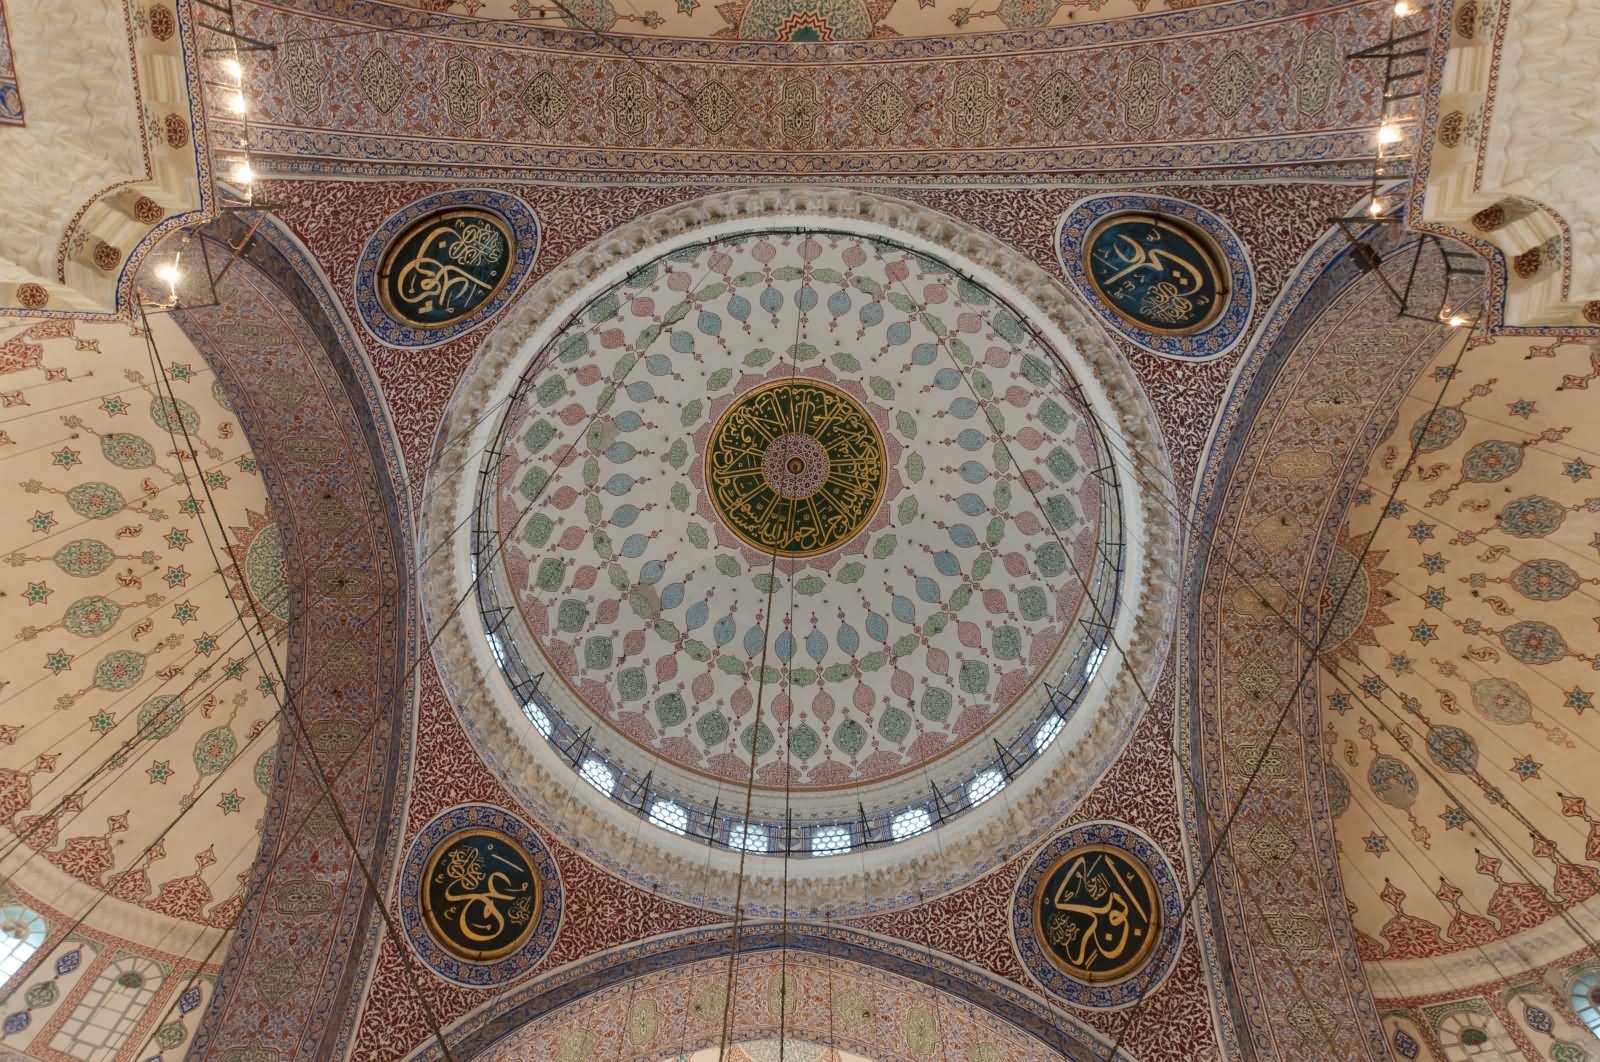 Main Dome Inside The Yeni Cami Mosque